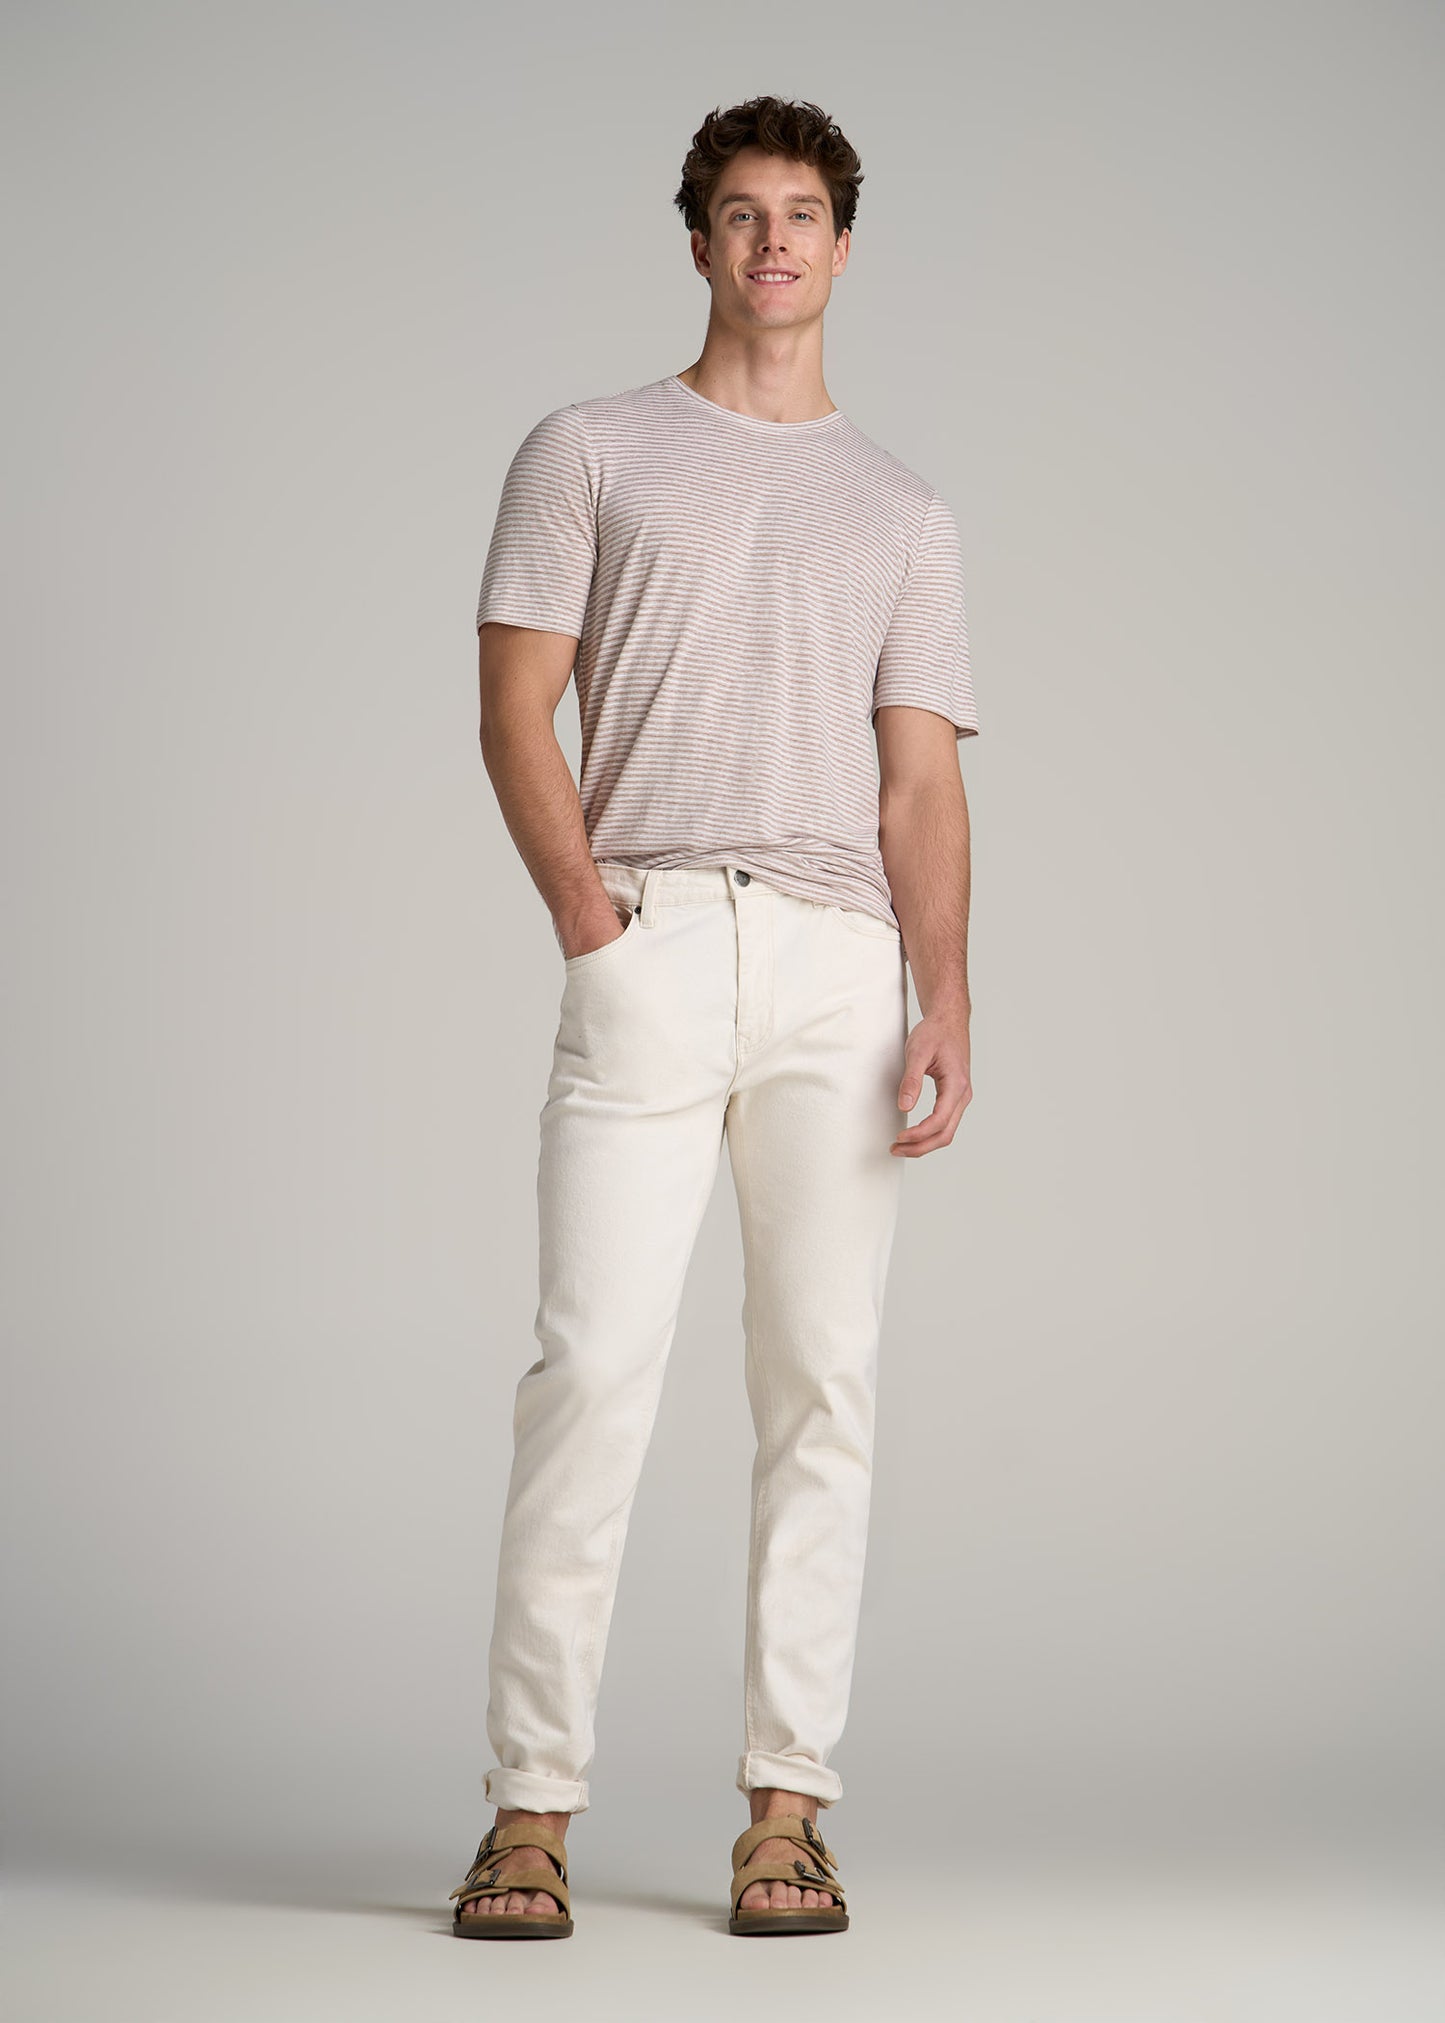 A tall man wearing American Tall's Linen Crewneck T-Shirt in Beige and White Stripe
and Milo Relaxed Tapered Jeans in Ecru Buff.